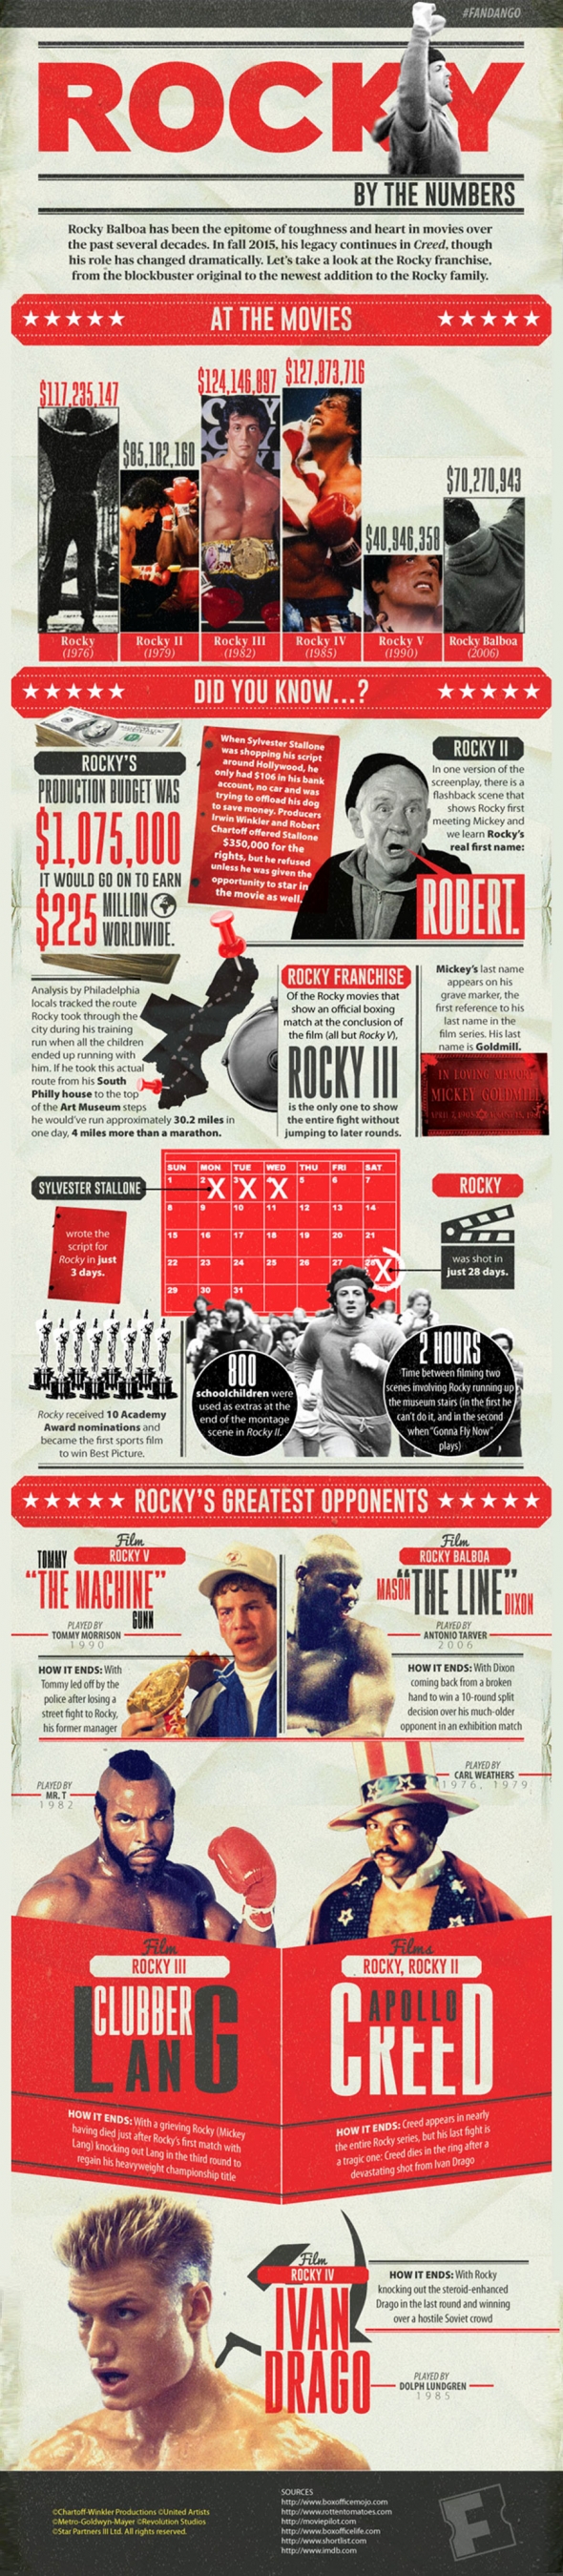 Rocky: By the Numbers [Infographic]